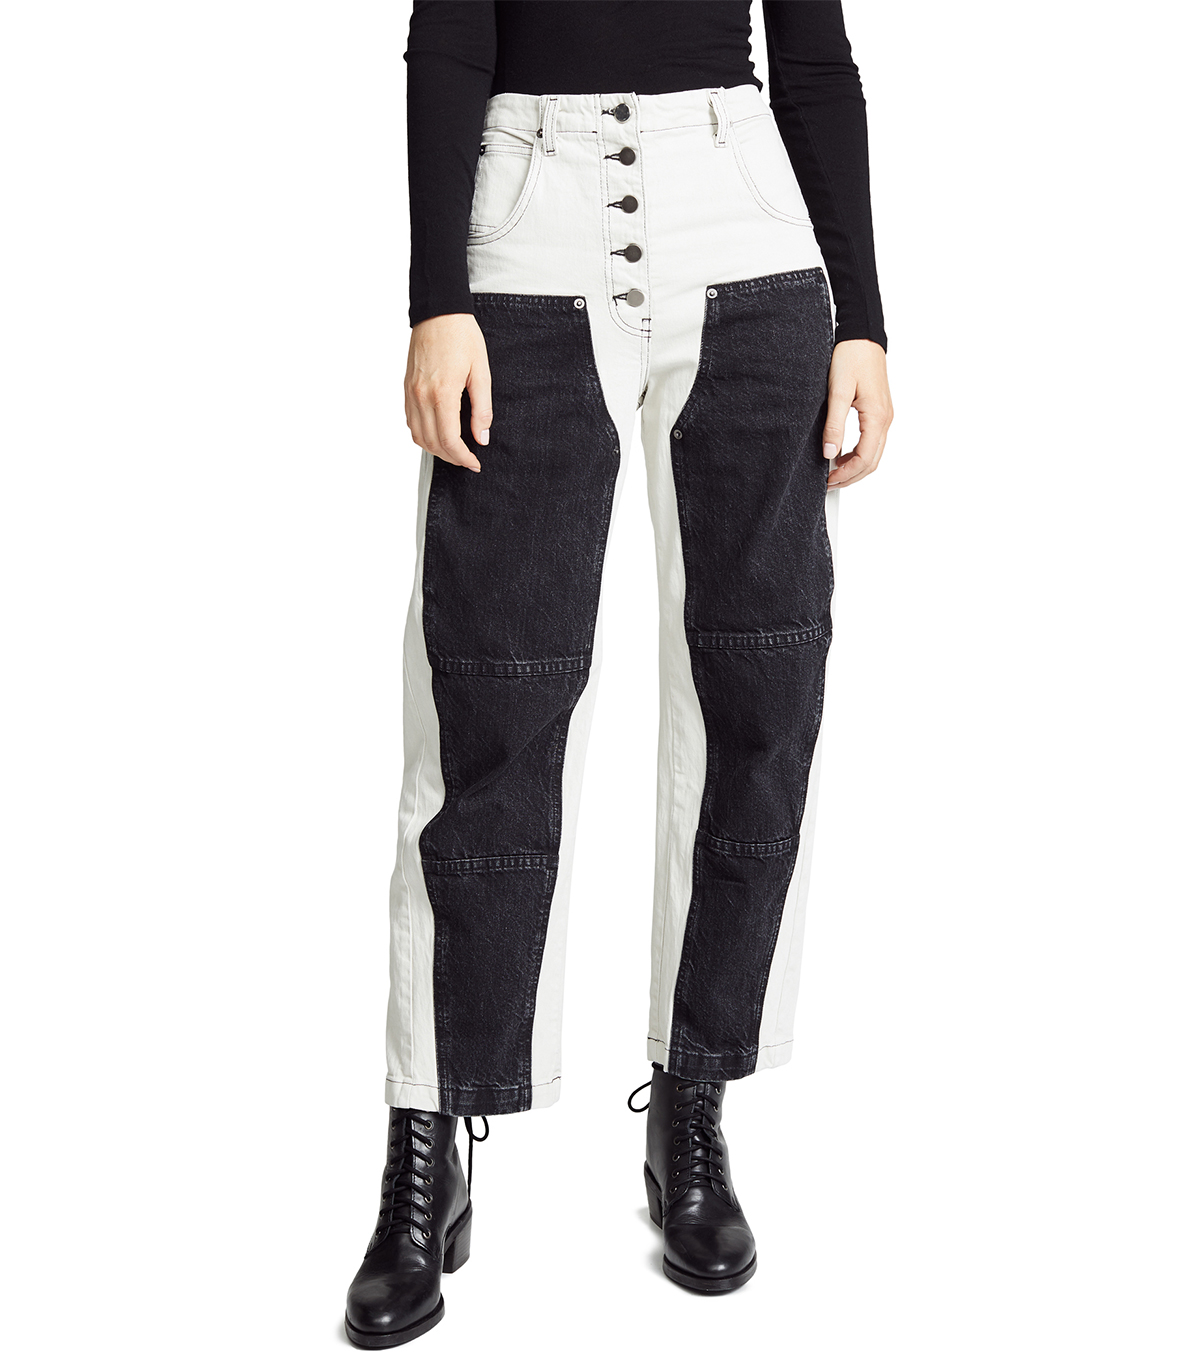 black and white color block jeans